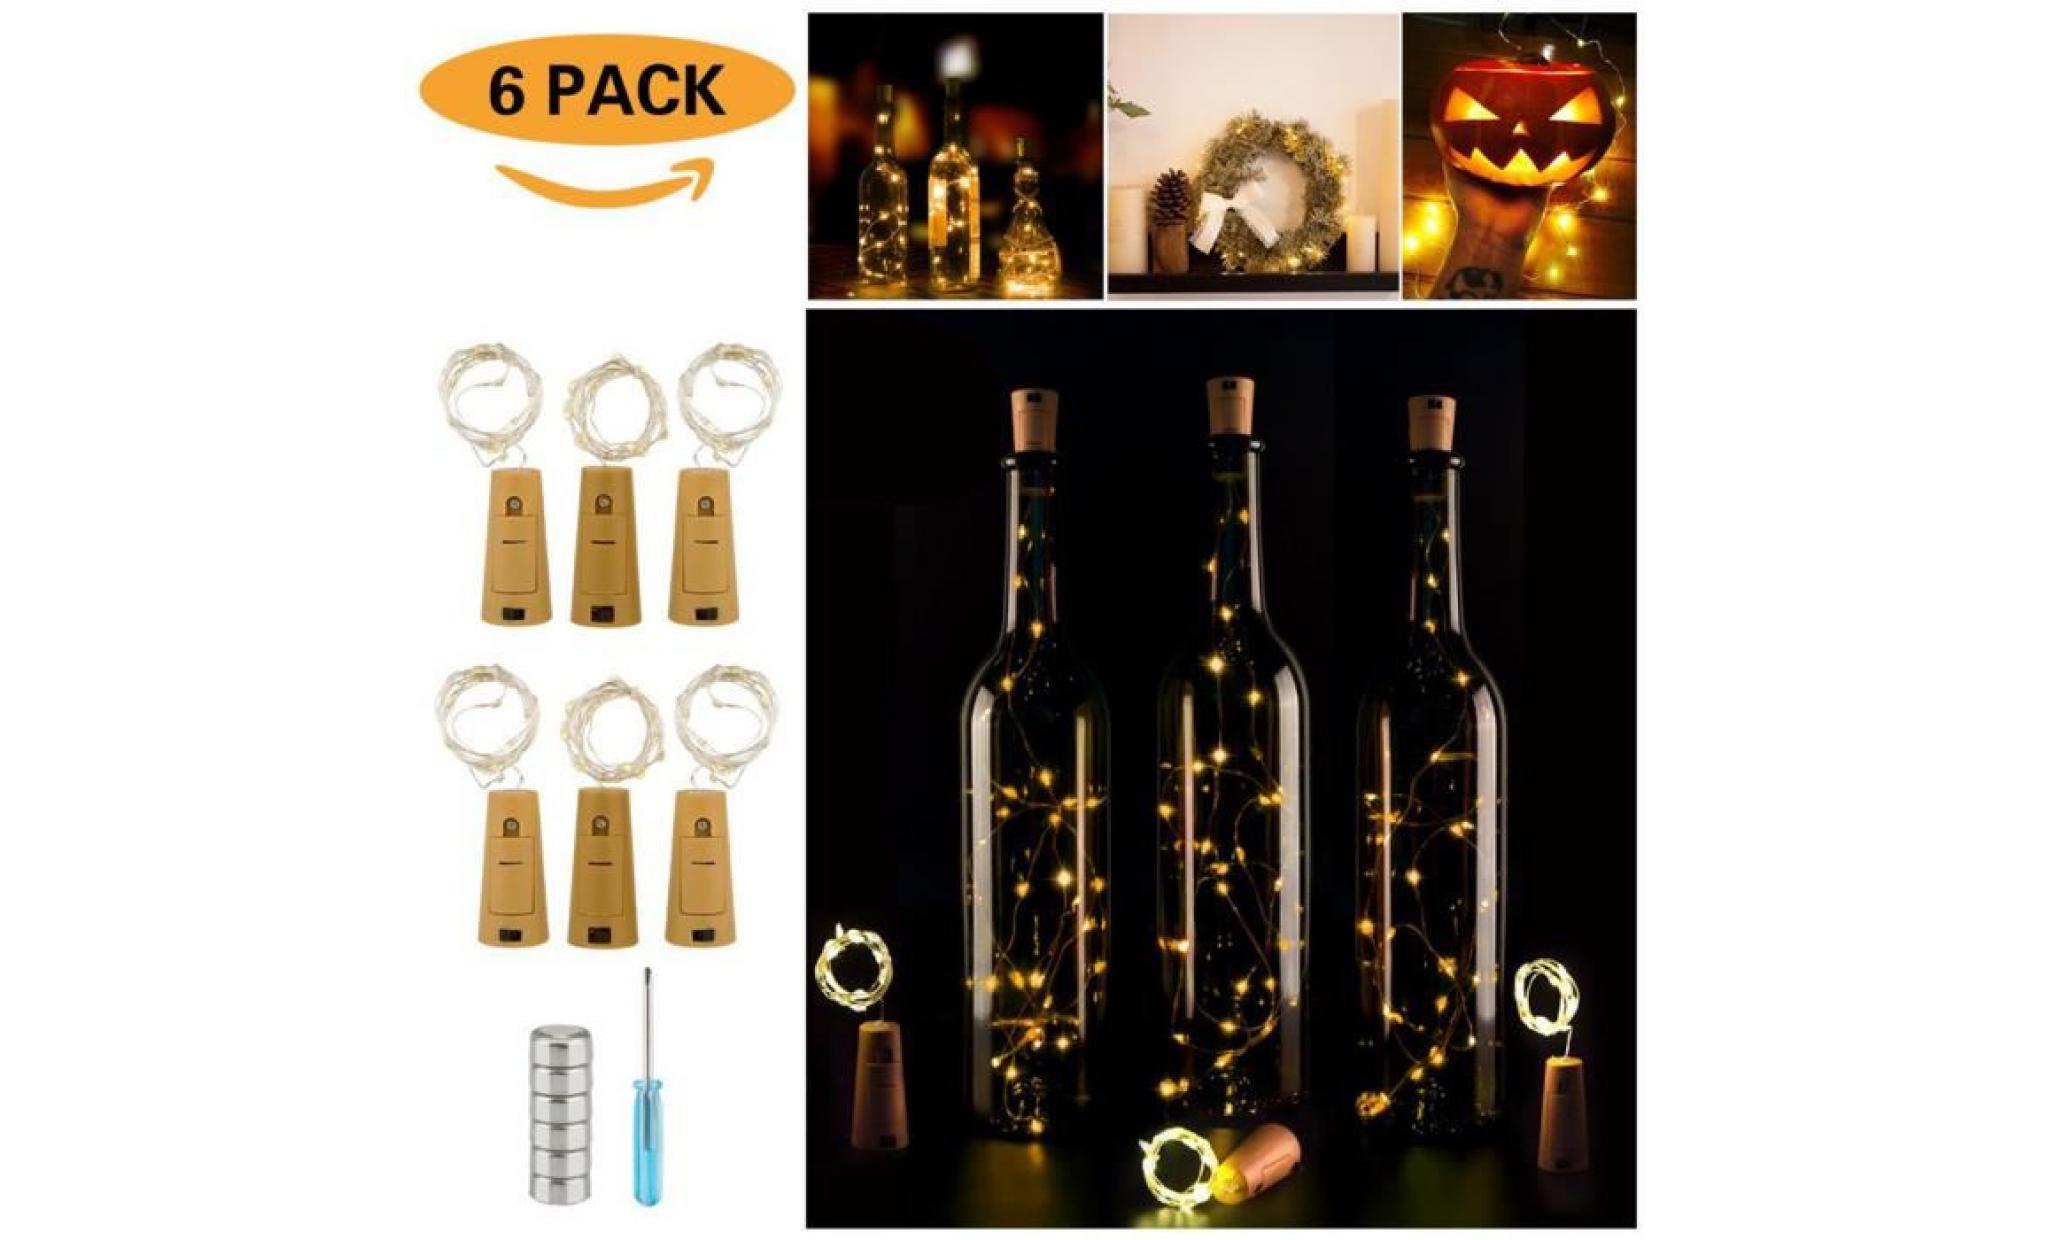 cork shaped 15 led night light starry lights wine bottle lamp for party colorful qinhig1583 pas cher